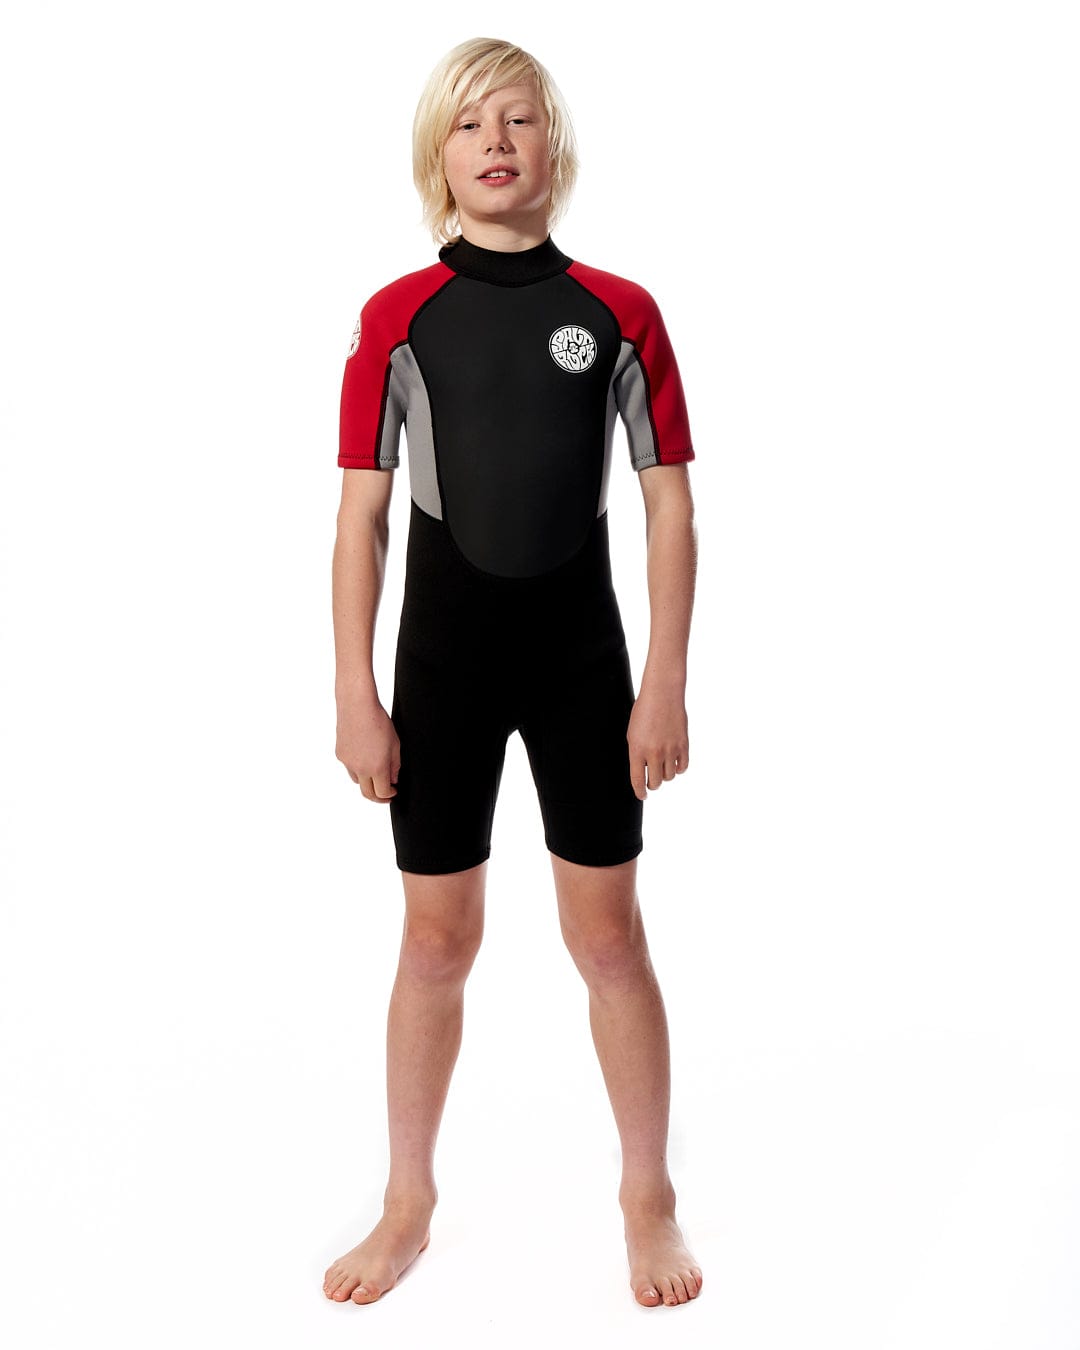 A young boy stands wearing a Saltrock Core - Boys 3/2 Shortie Wetsuit in Black/Red against a white background, looking directly at the camera.